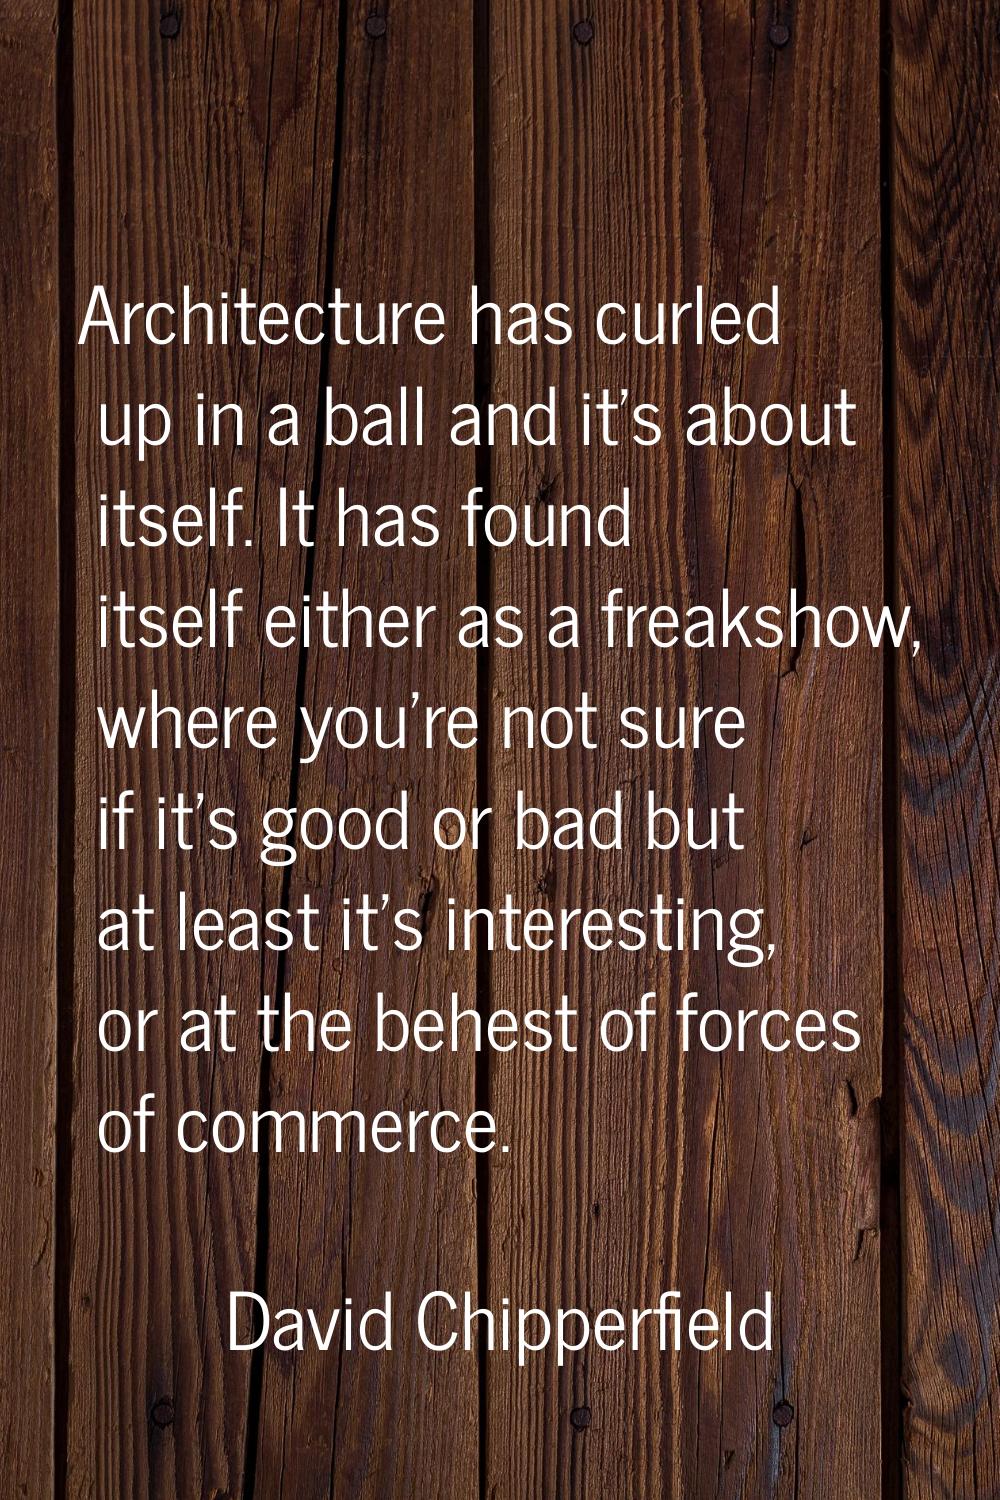 Architecture has curled up in a ball and it's about itself. It has found itself either as a freaksh